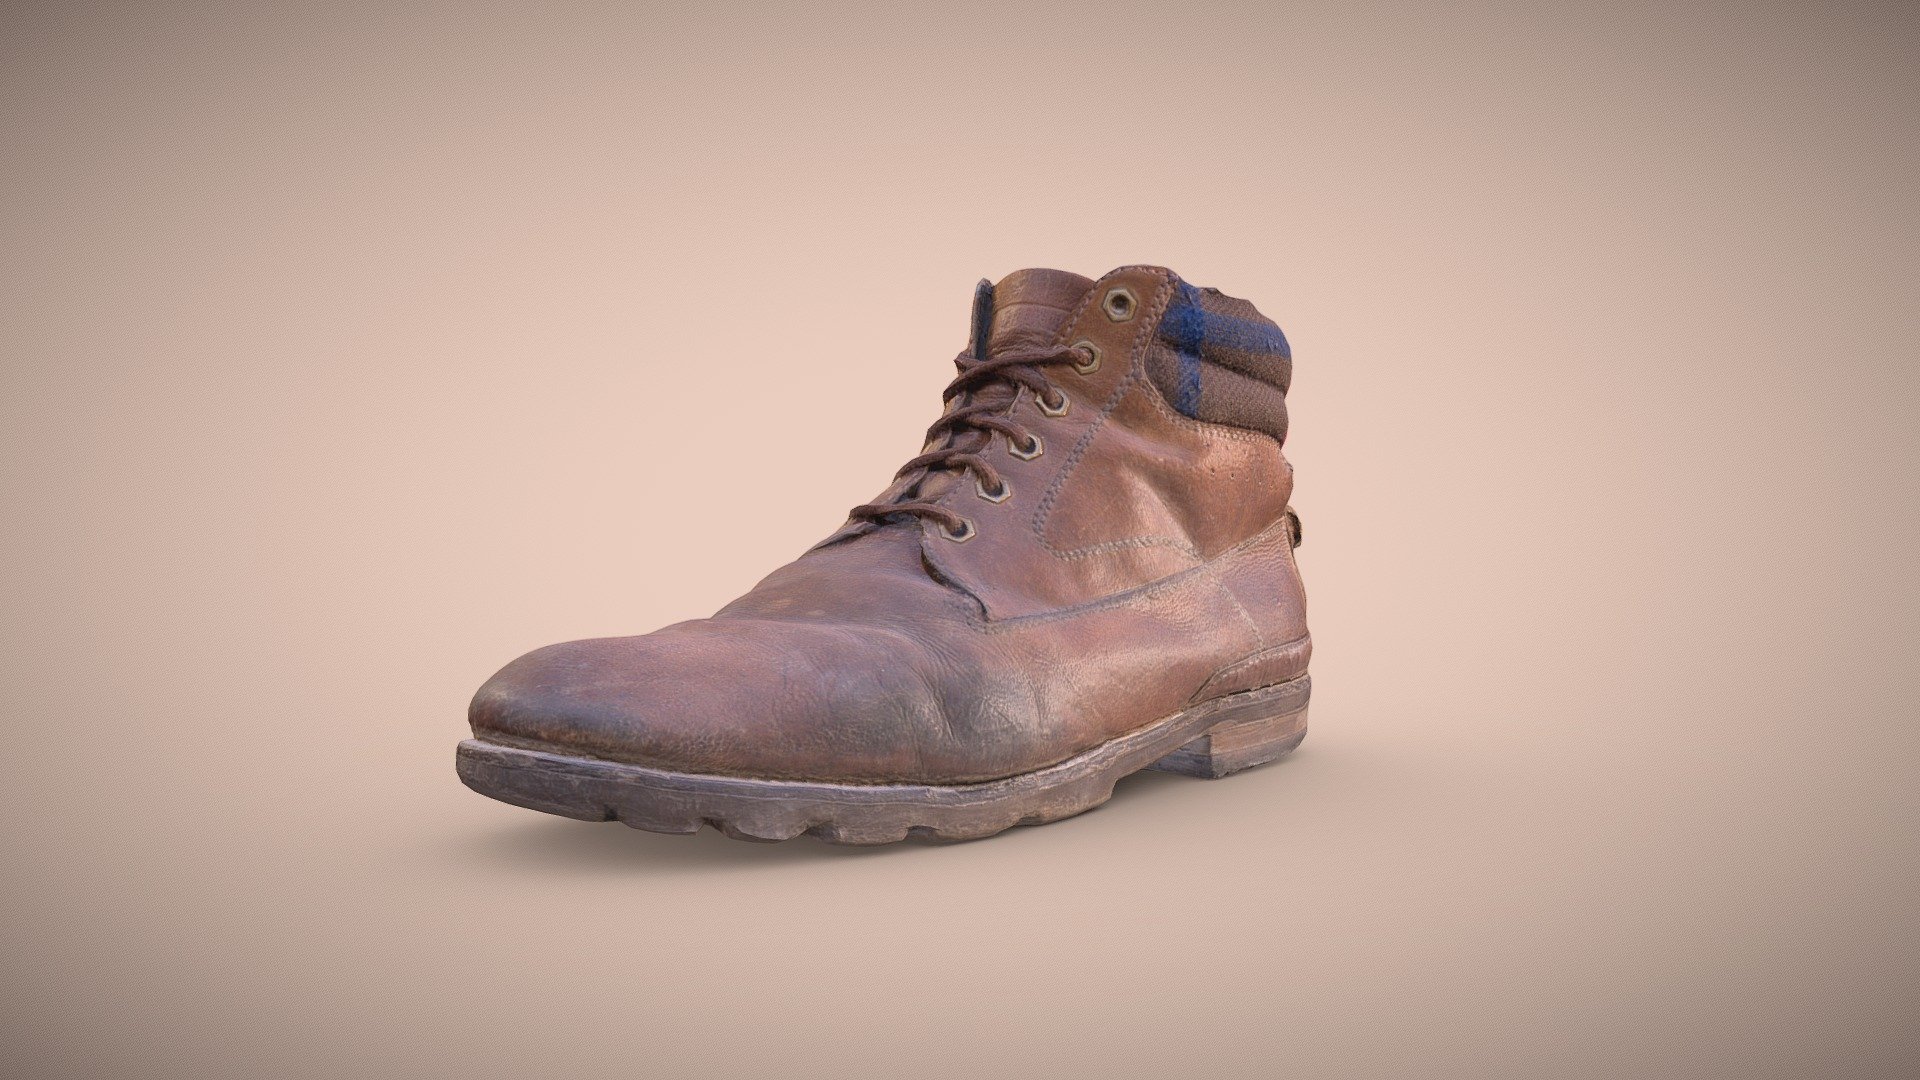 Scan of one of my old QuickSilver Del Fuego boots, are almost destroyed, so sad, were so comfortable! - QuickSilver Del Fuego - 3D model by Juan (@juane3d) 3d model